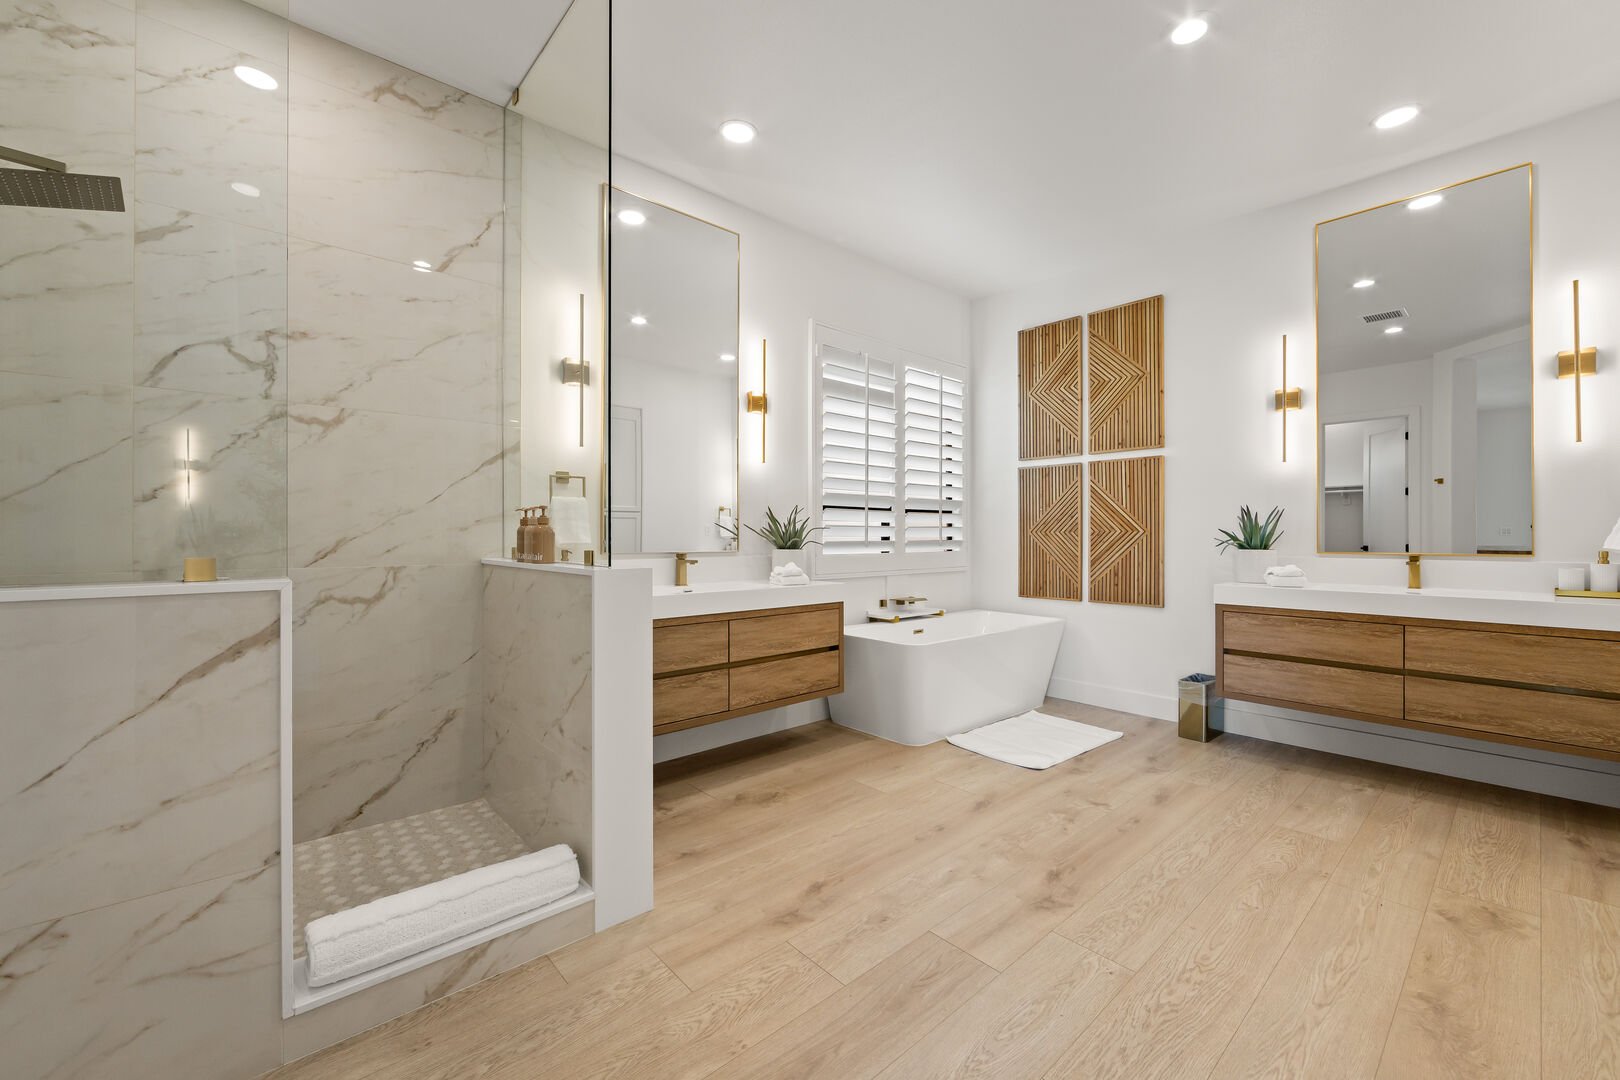 Master Suite 1 private en-suite bathroom boasts a soaking tub, a marble shower that extends up to the ceiling, and his and her floating vanity sinks.